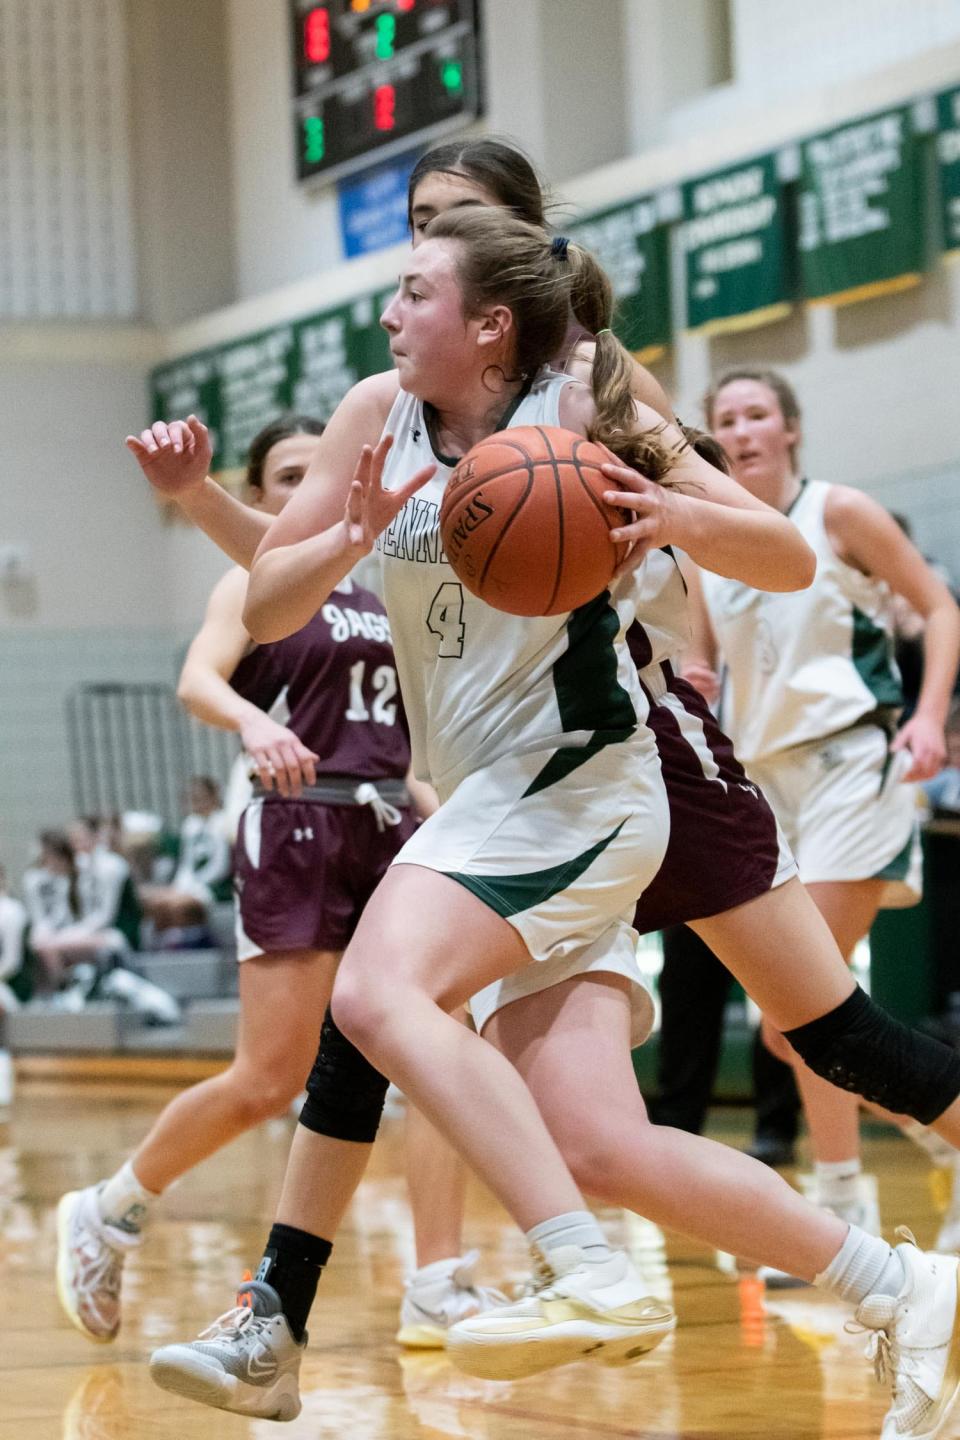 Pennridge's Katie Yoder drives to the basket in a District One Class 6A first round playoff game against Garnet Valley at Pennridge High School in Perkasie on Friday, February 17, 2023. The Jaguars defeated the Rams 45-42.